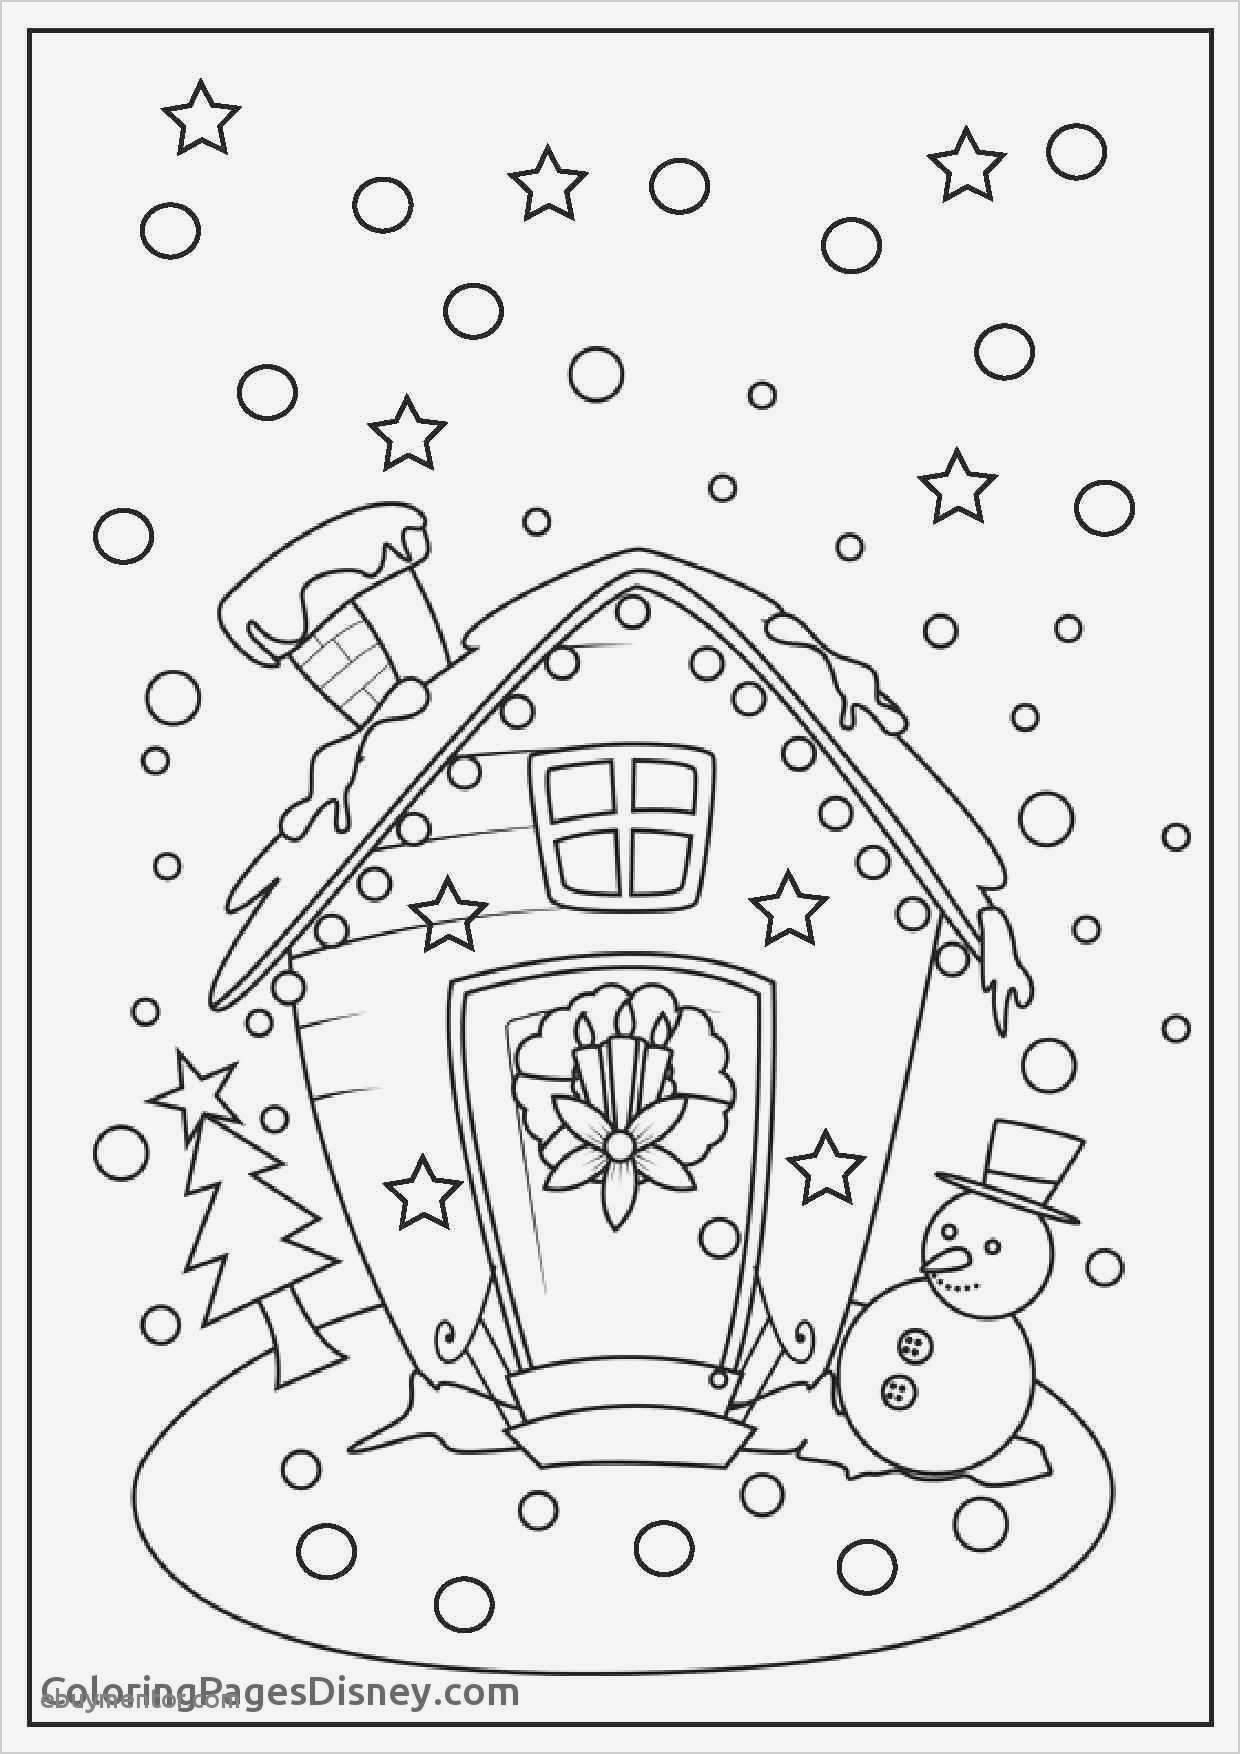 printable christmas coloring page 19 coolest free printables - 2020 coloring pages for christmas wallpapers images photos | xmas coloring pages printable